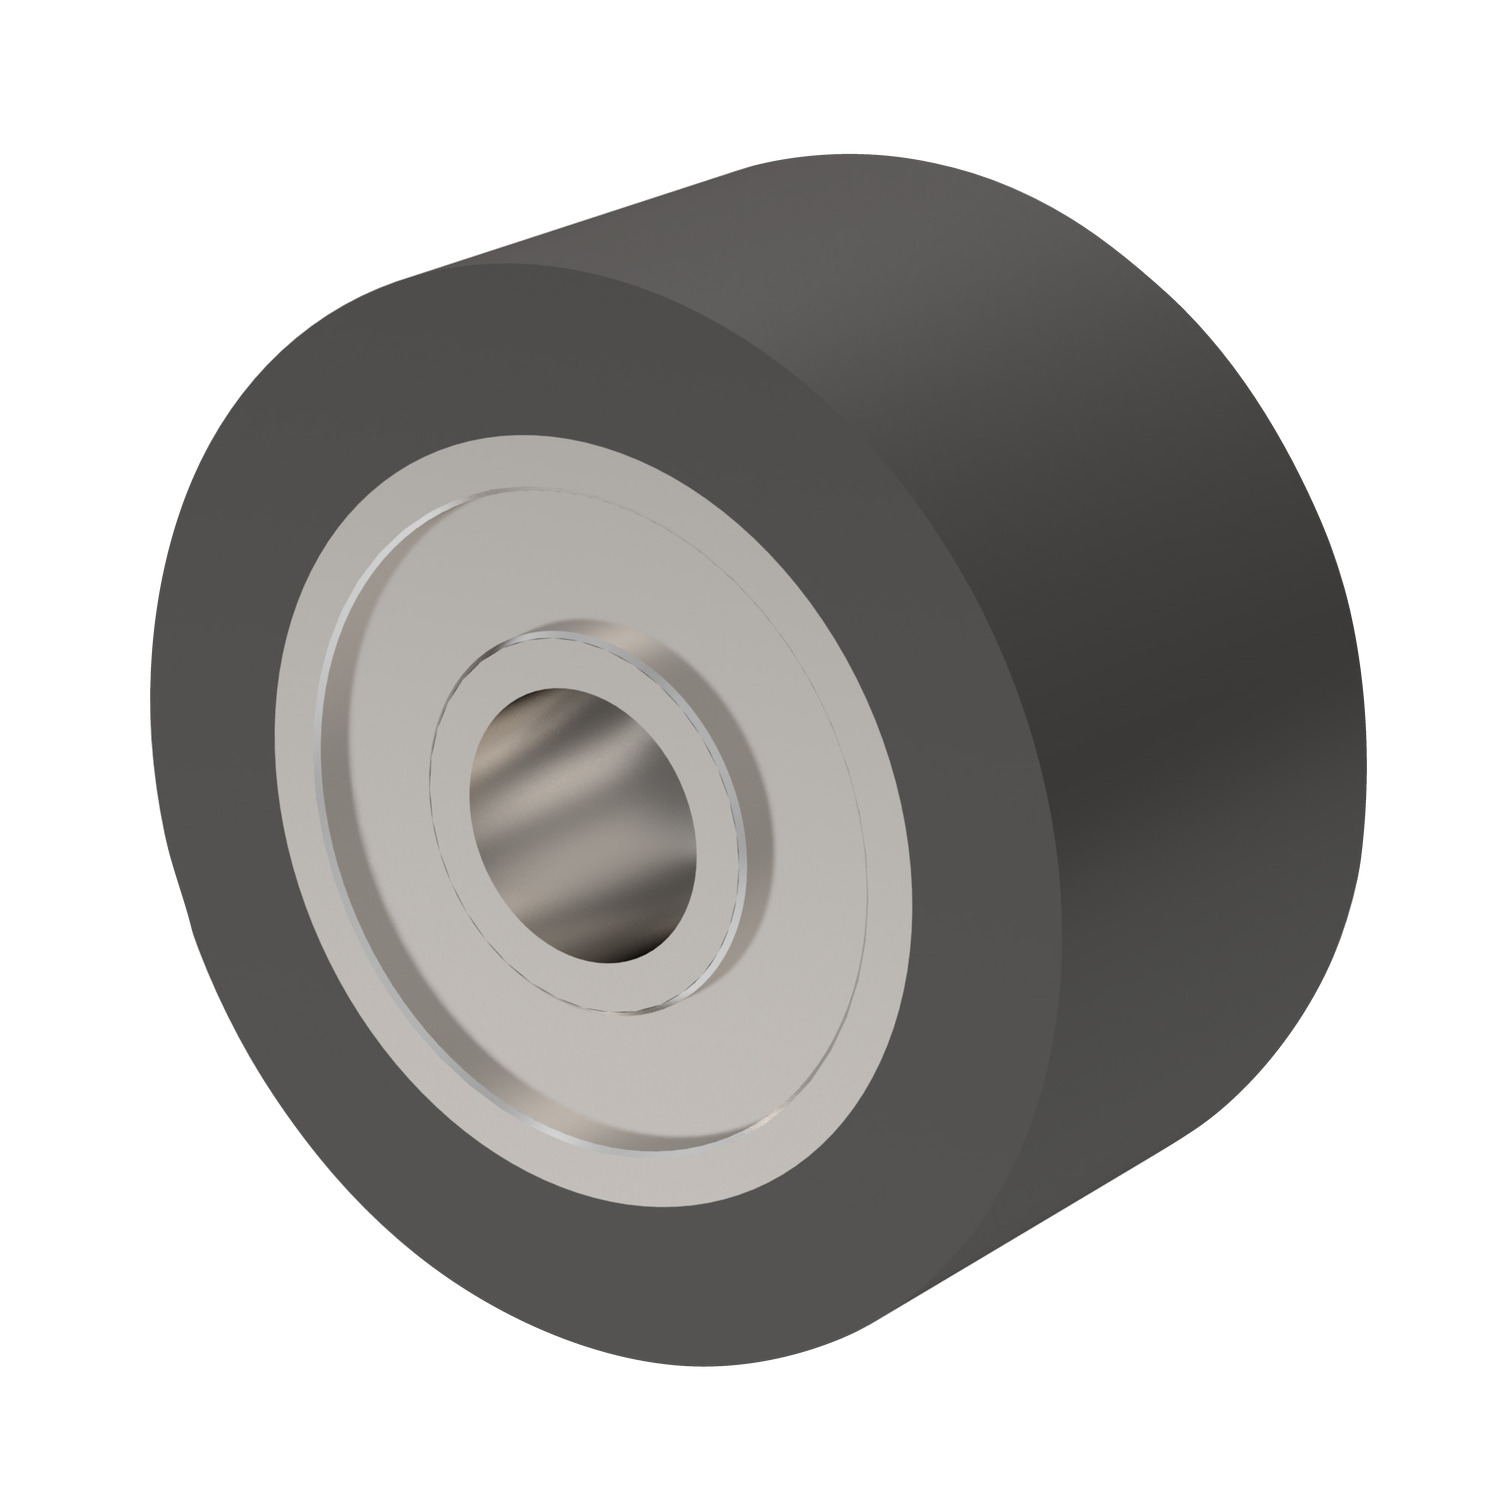 60610.W1119 Urethane Double Bearing 25mm 2RS x 70mm DIA x 24mm WD, Duro = 95